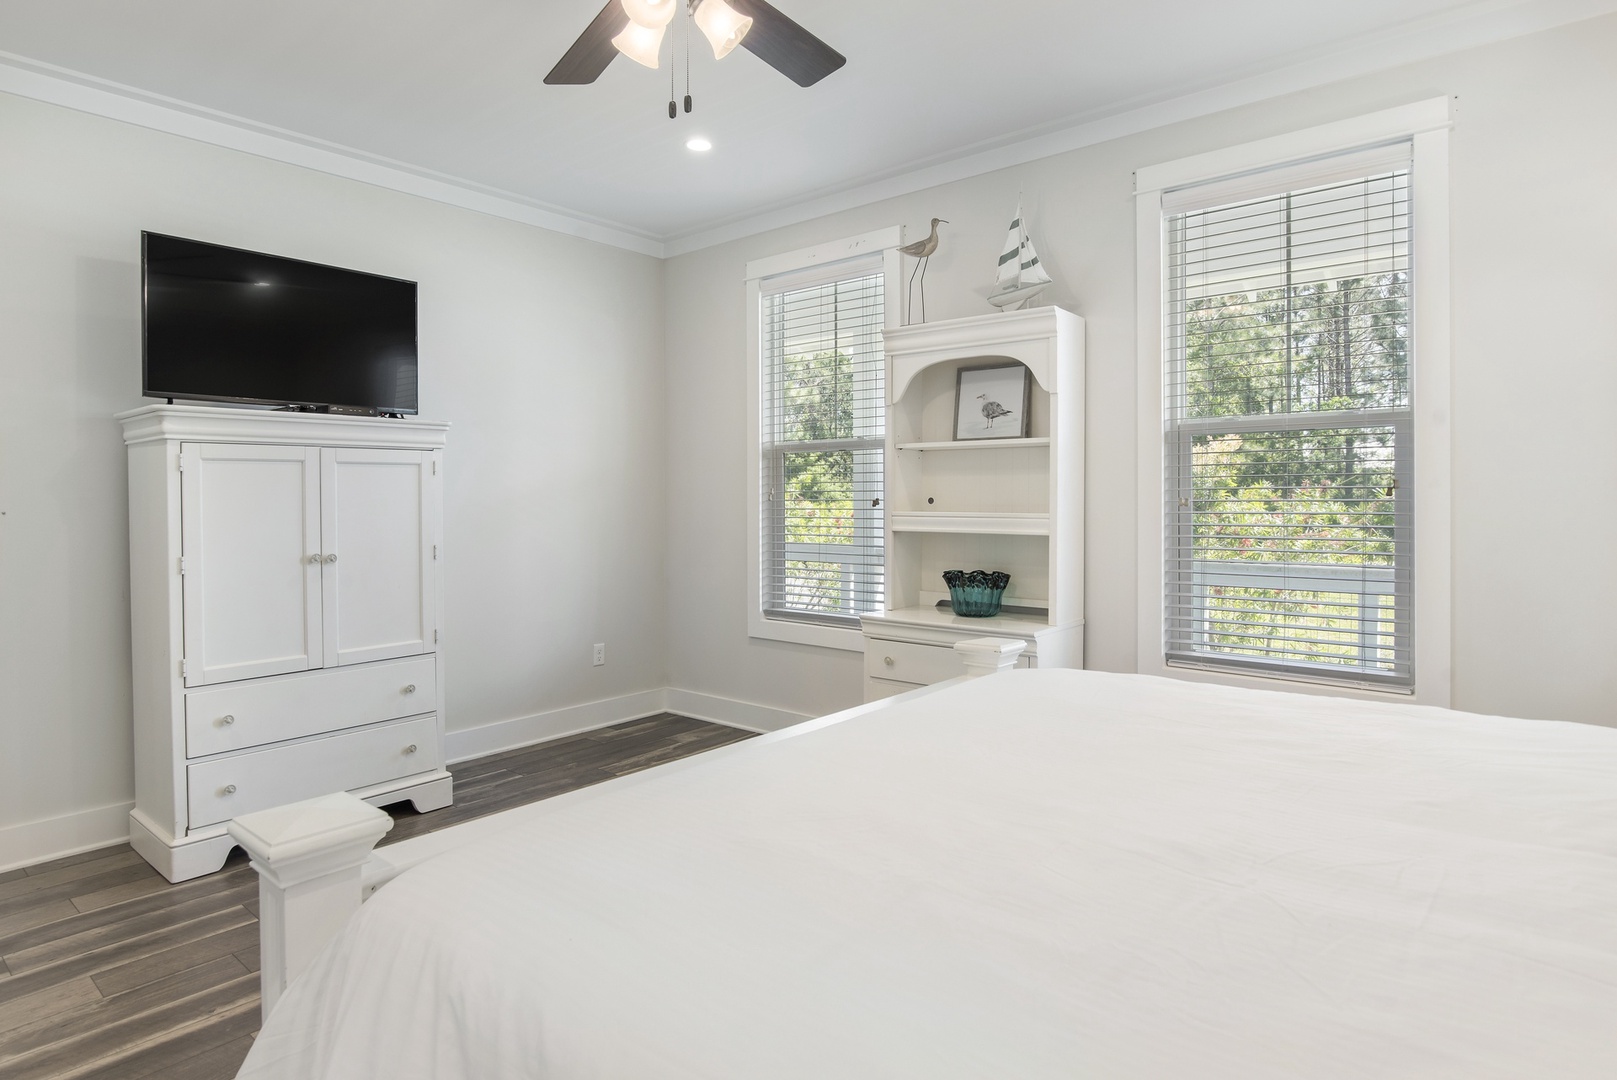 The ground-floor master suite offers a king size bed and large private bathroom!